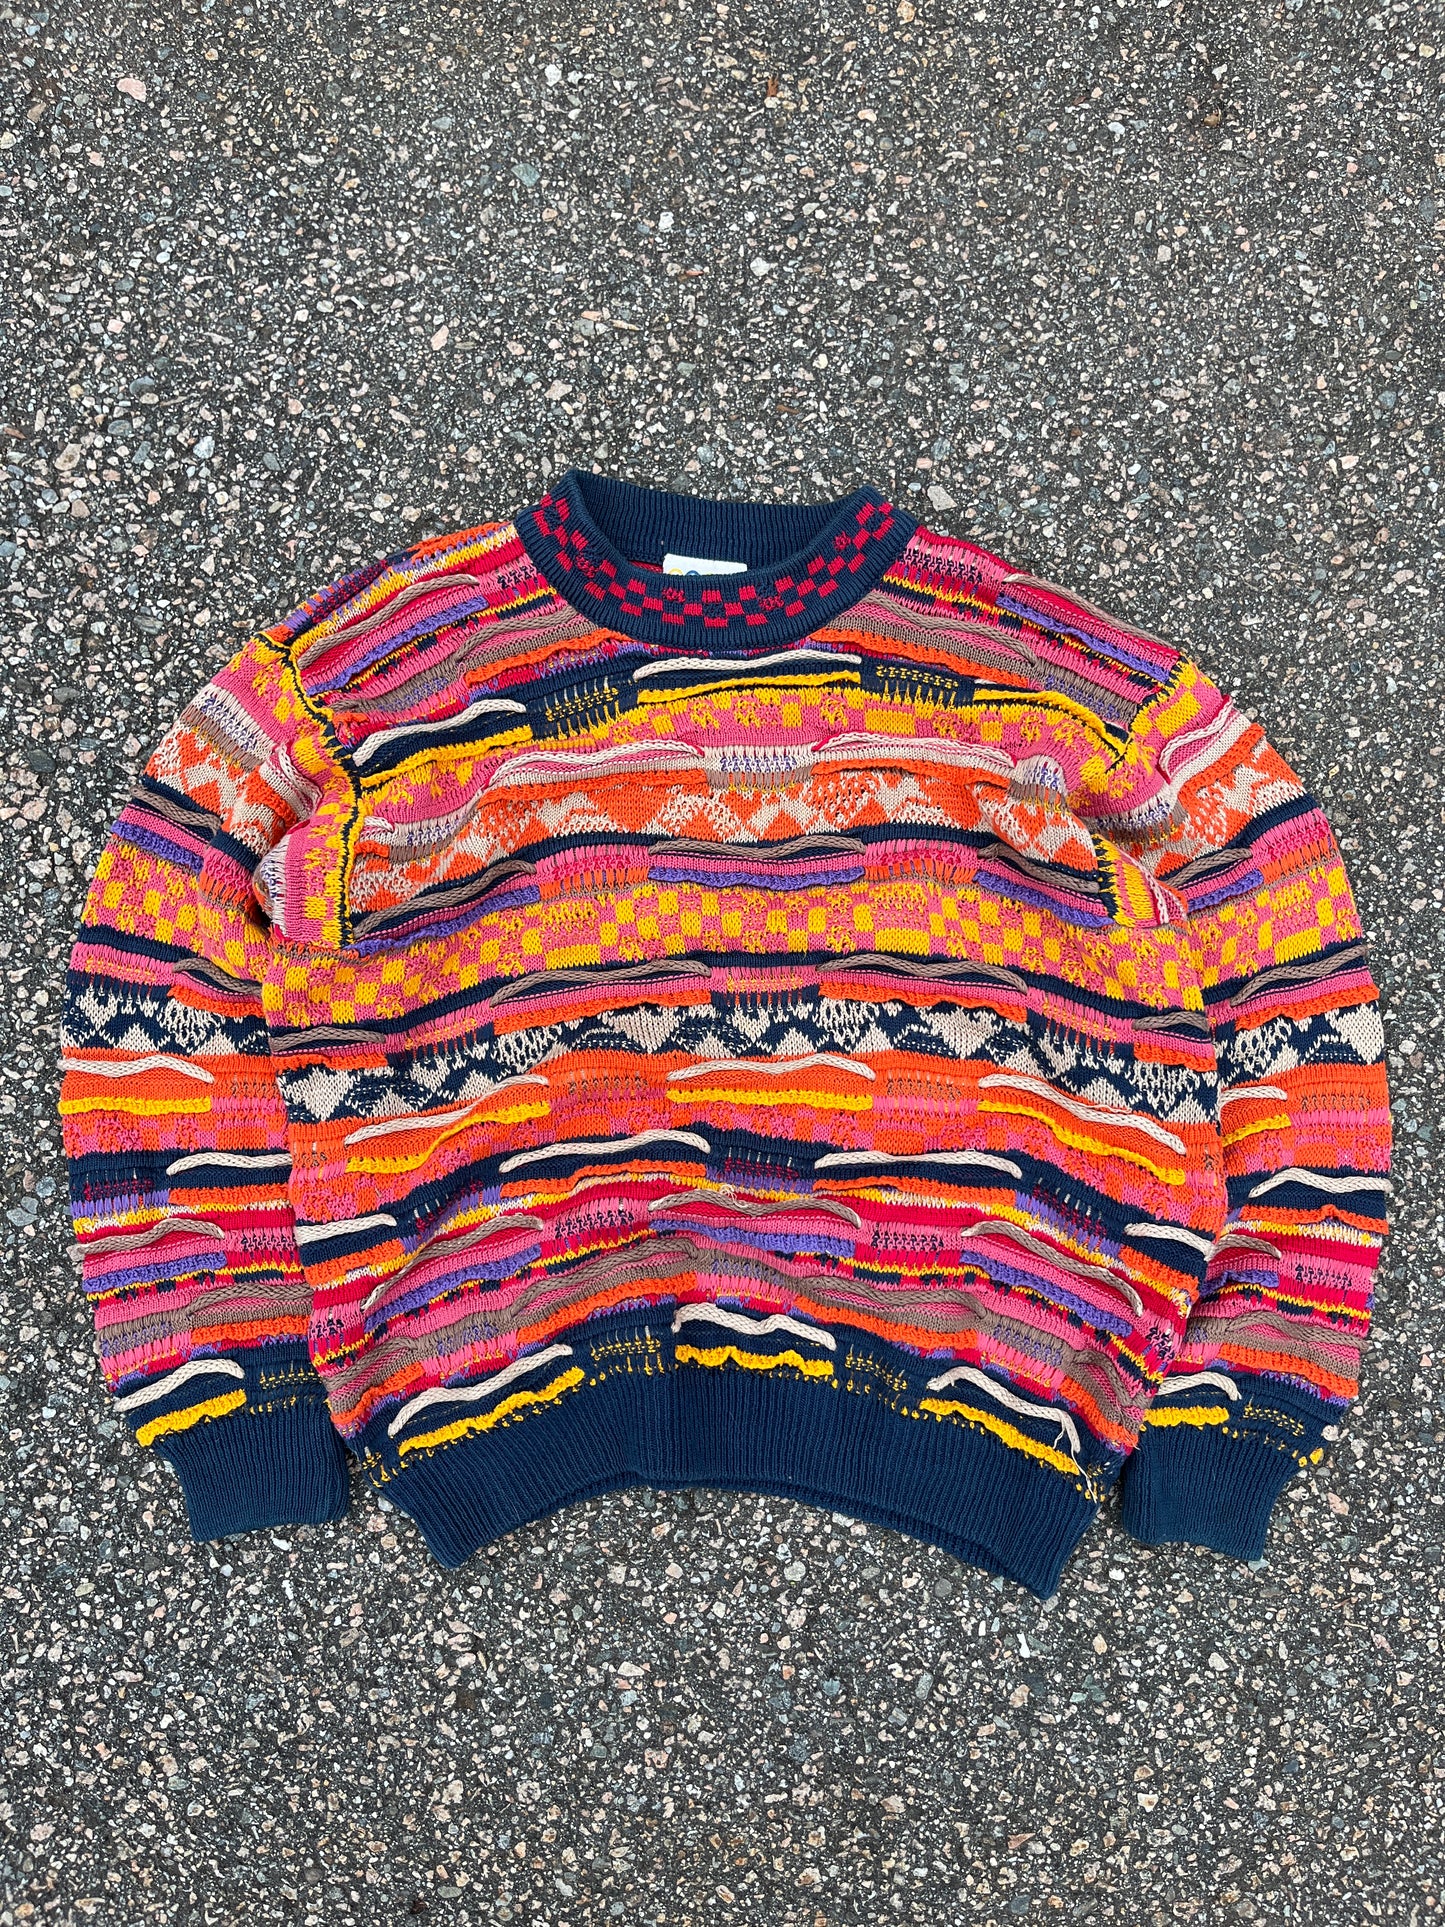 Vintage Coogi 3D Knit Cotton Sweater - Small